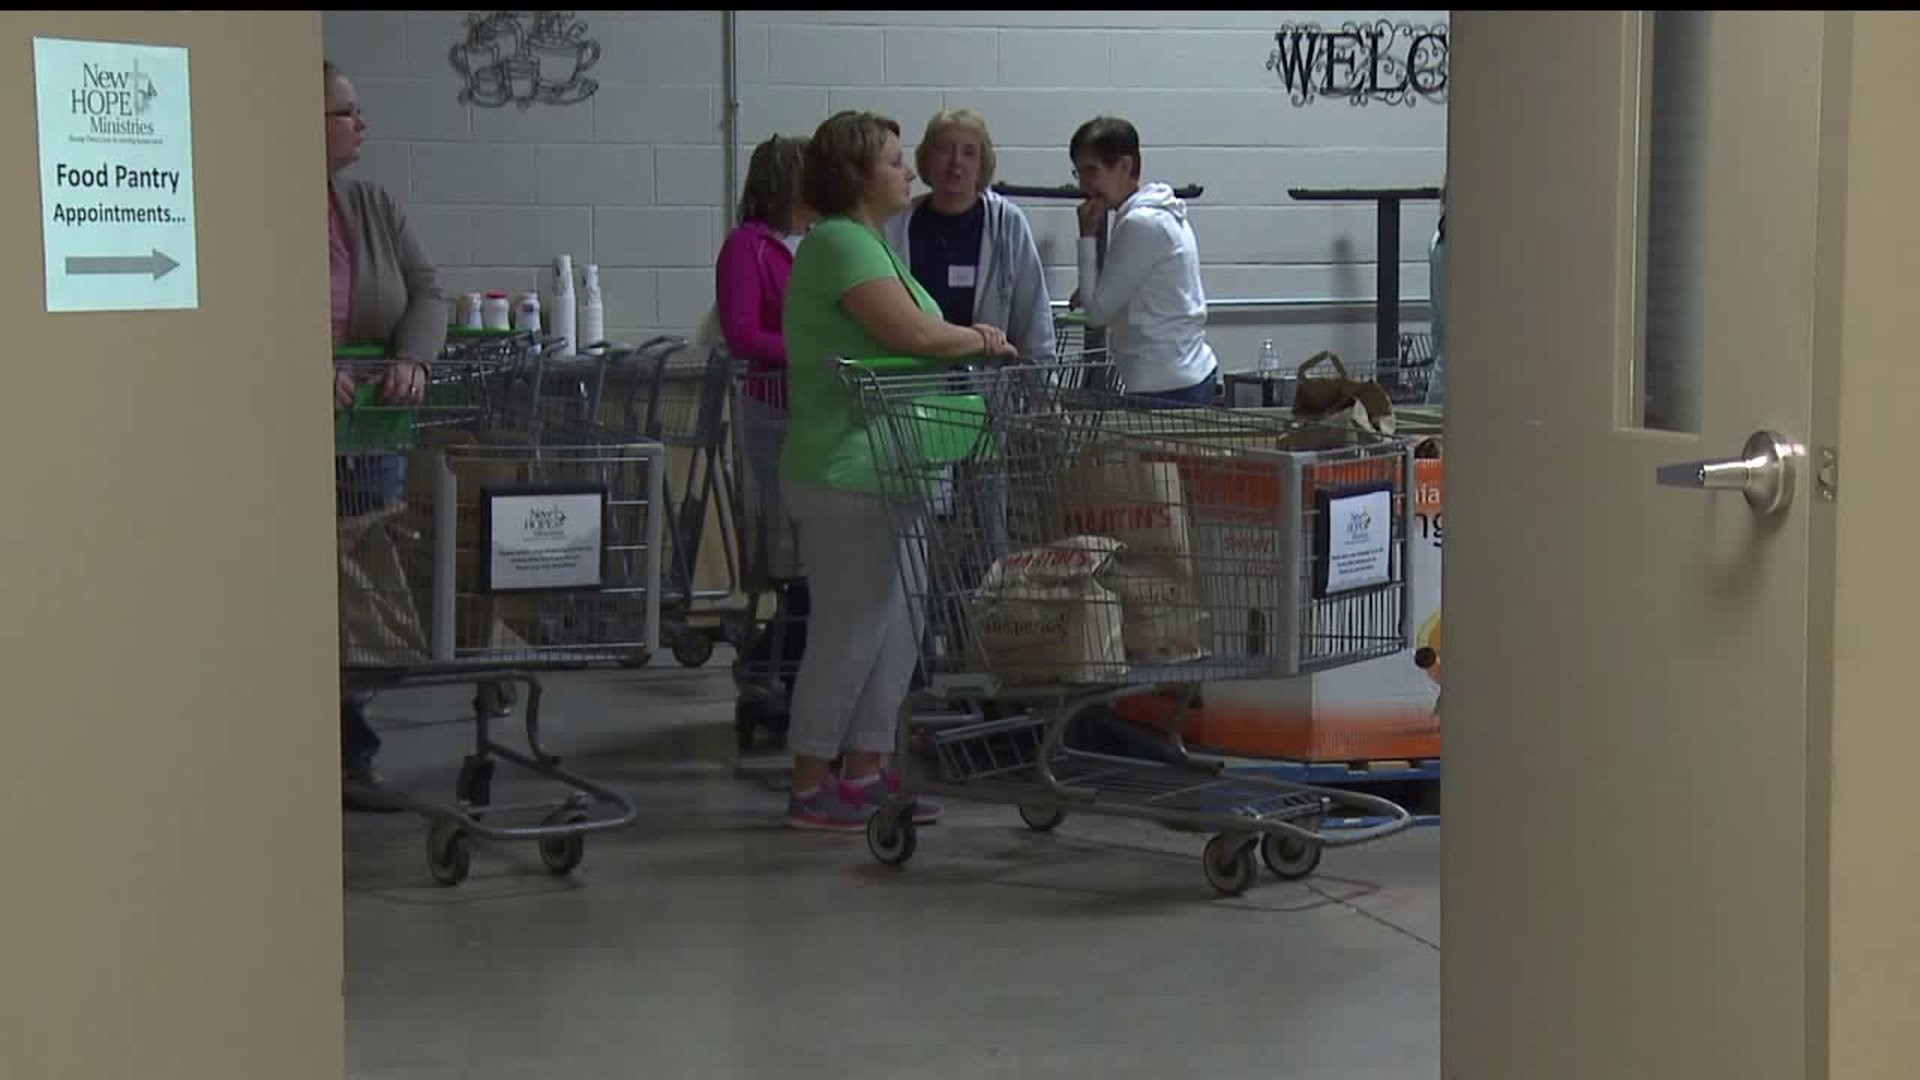 New Hope Ministries in York County helping families in need get a Thanksgiving meal